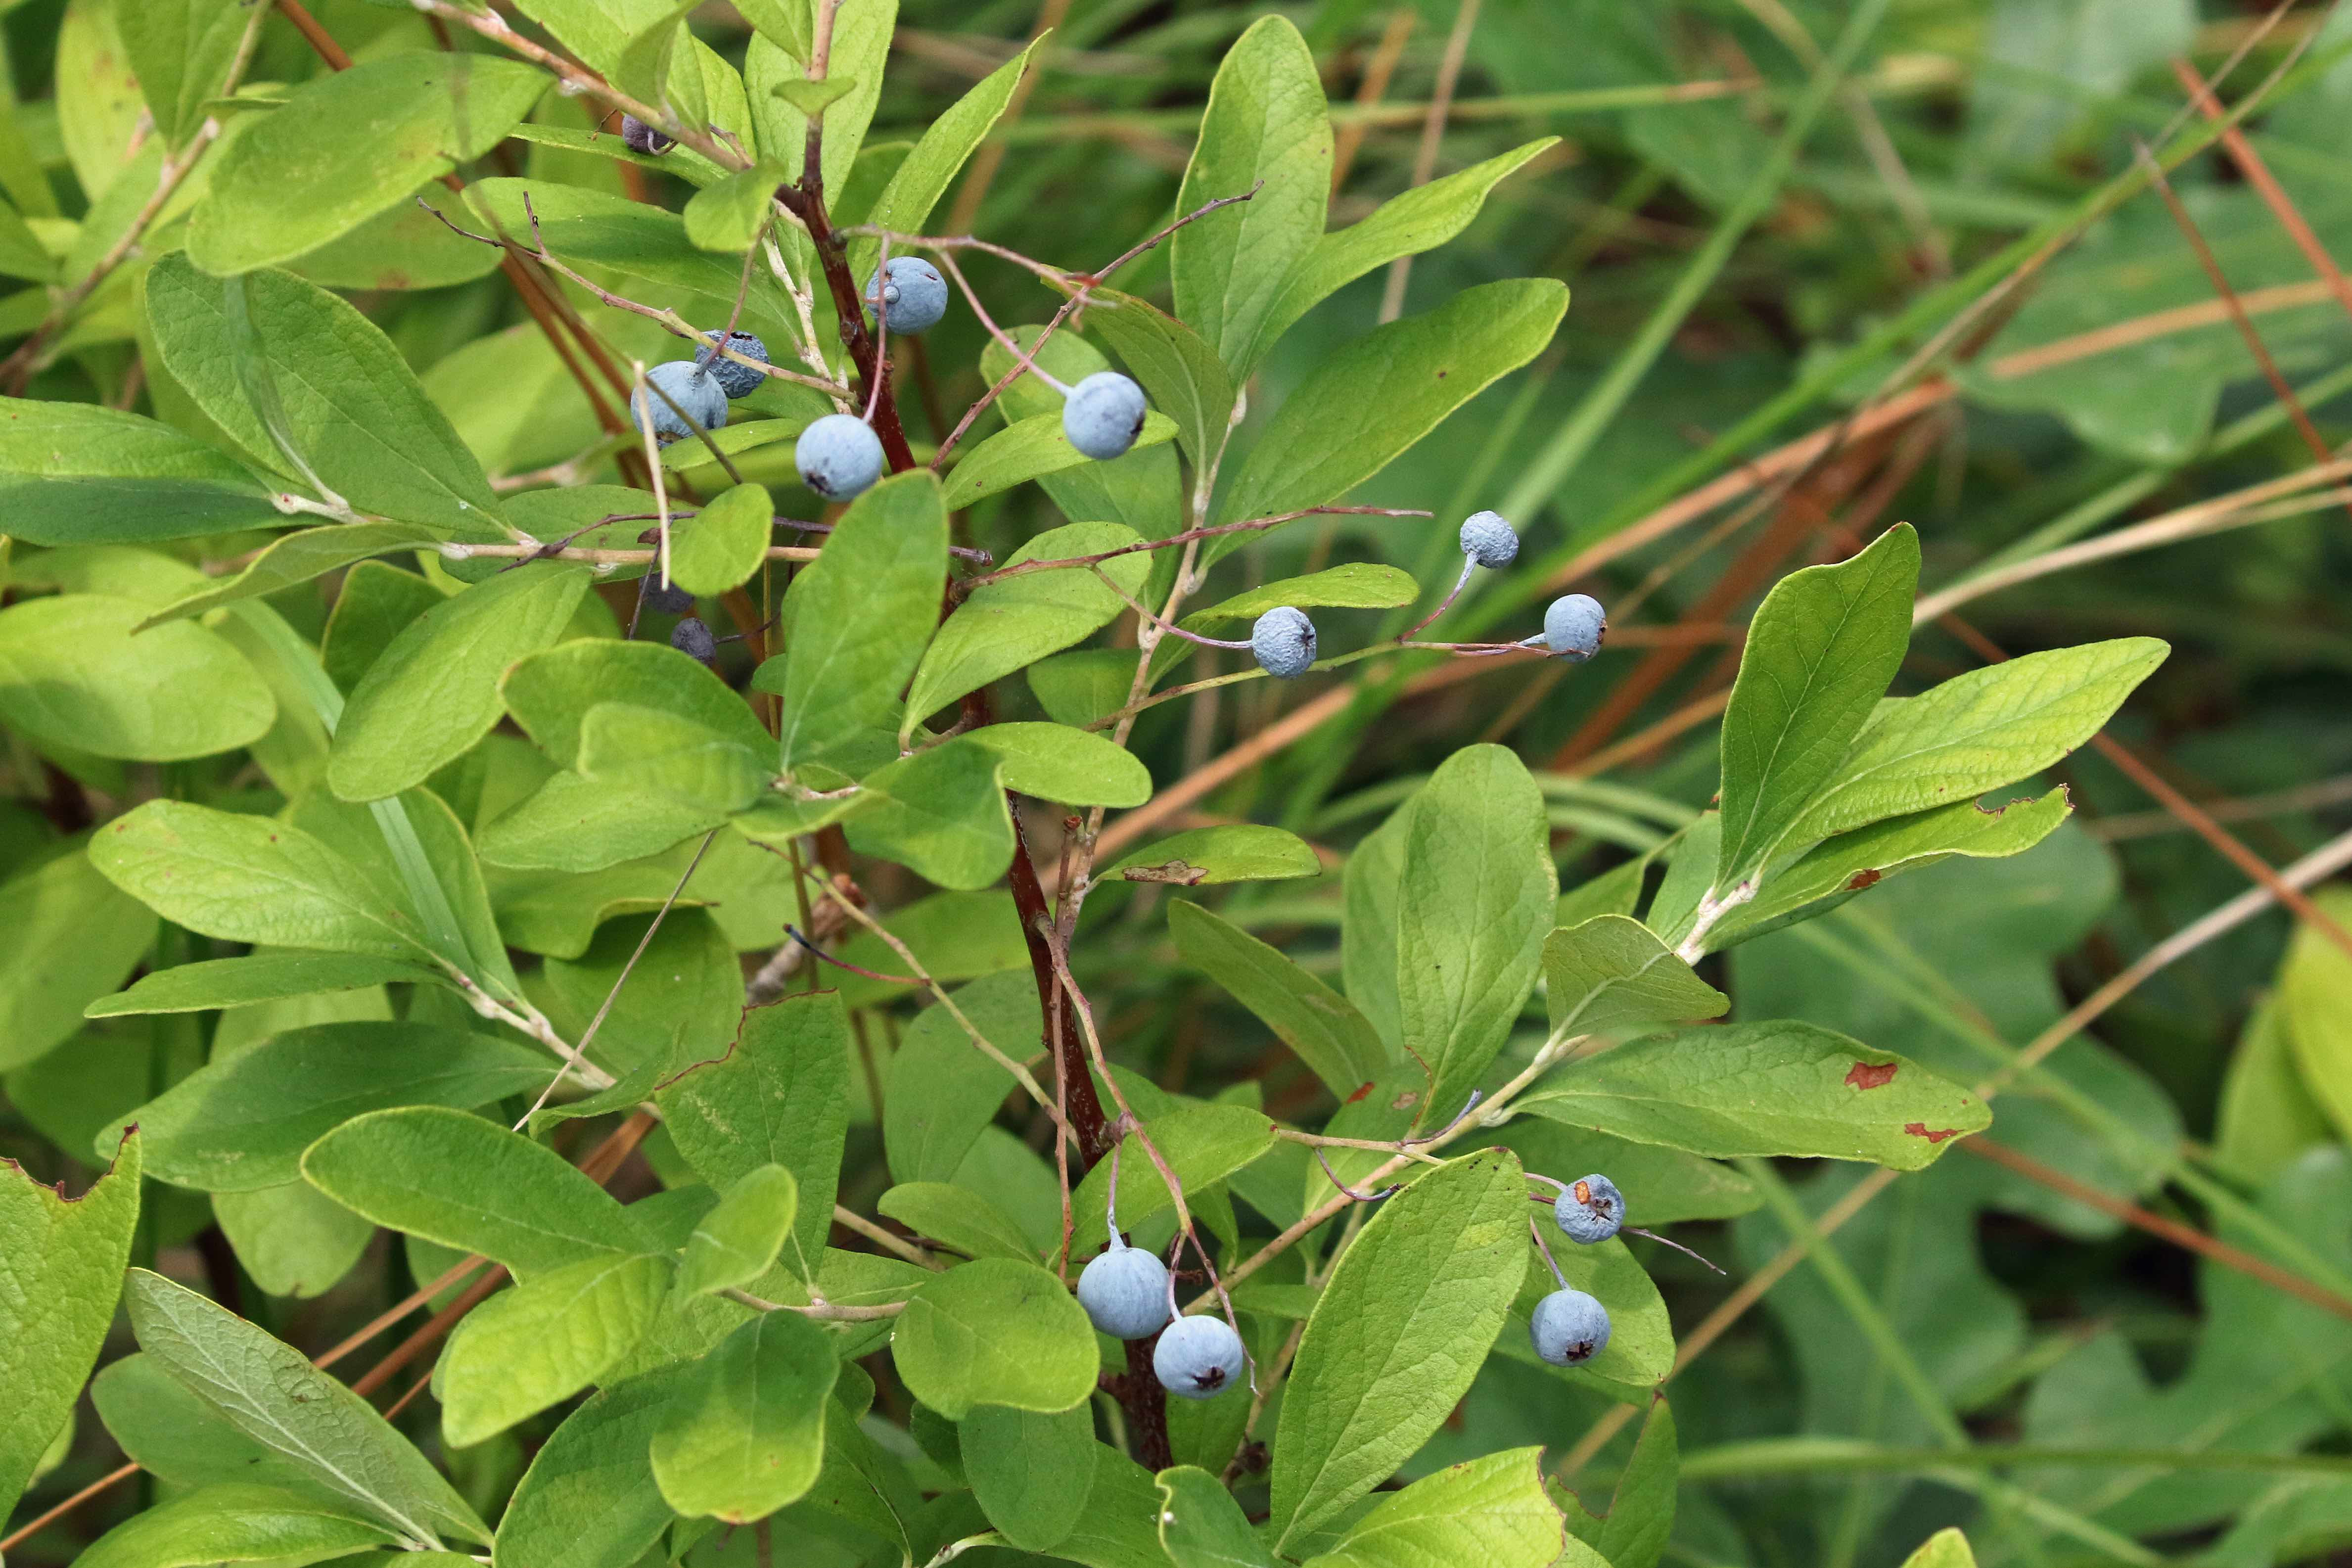 The Scientific Name is Gaylussacia frondosa. You will likely hear them called Blue Huckleberry, Dangleberry. This picture shows the The pale blue fruits are produced on long, branching stalks that might account for a common name 